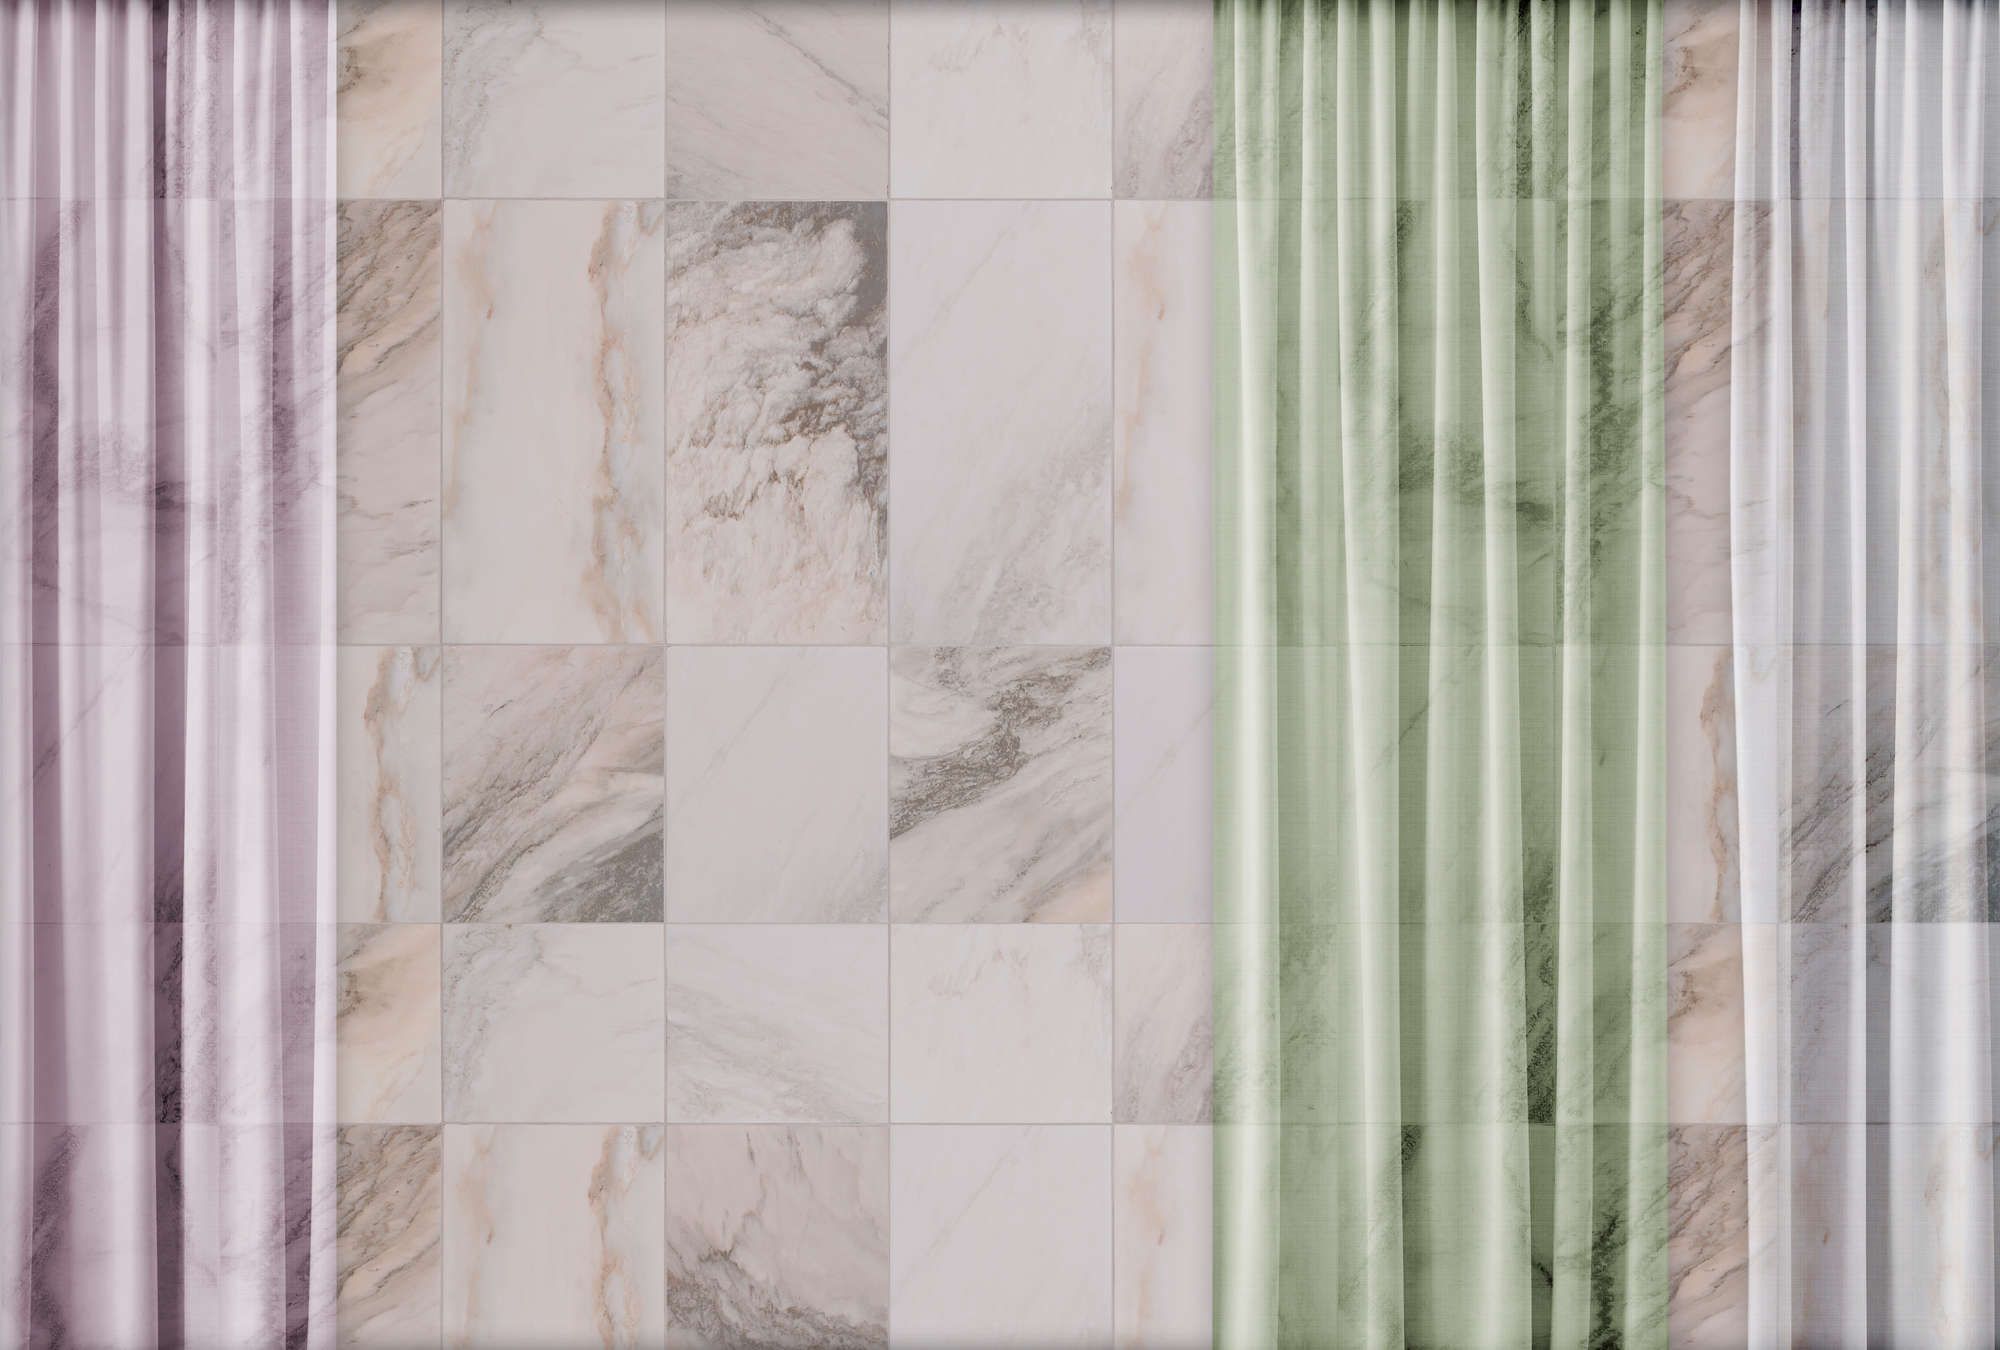             Photo wallpaper »nova 2« - Pastel coloured curtains in front of a beige marble wall - Matt, Smooth non-woven fabric
        